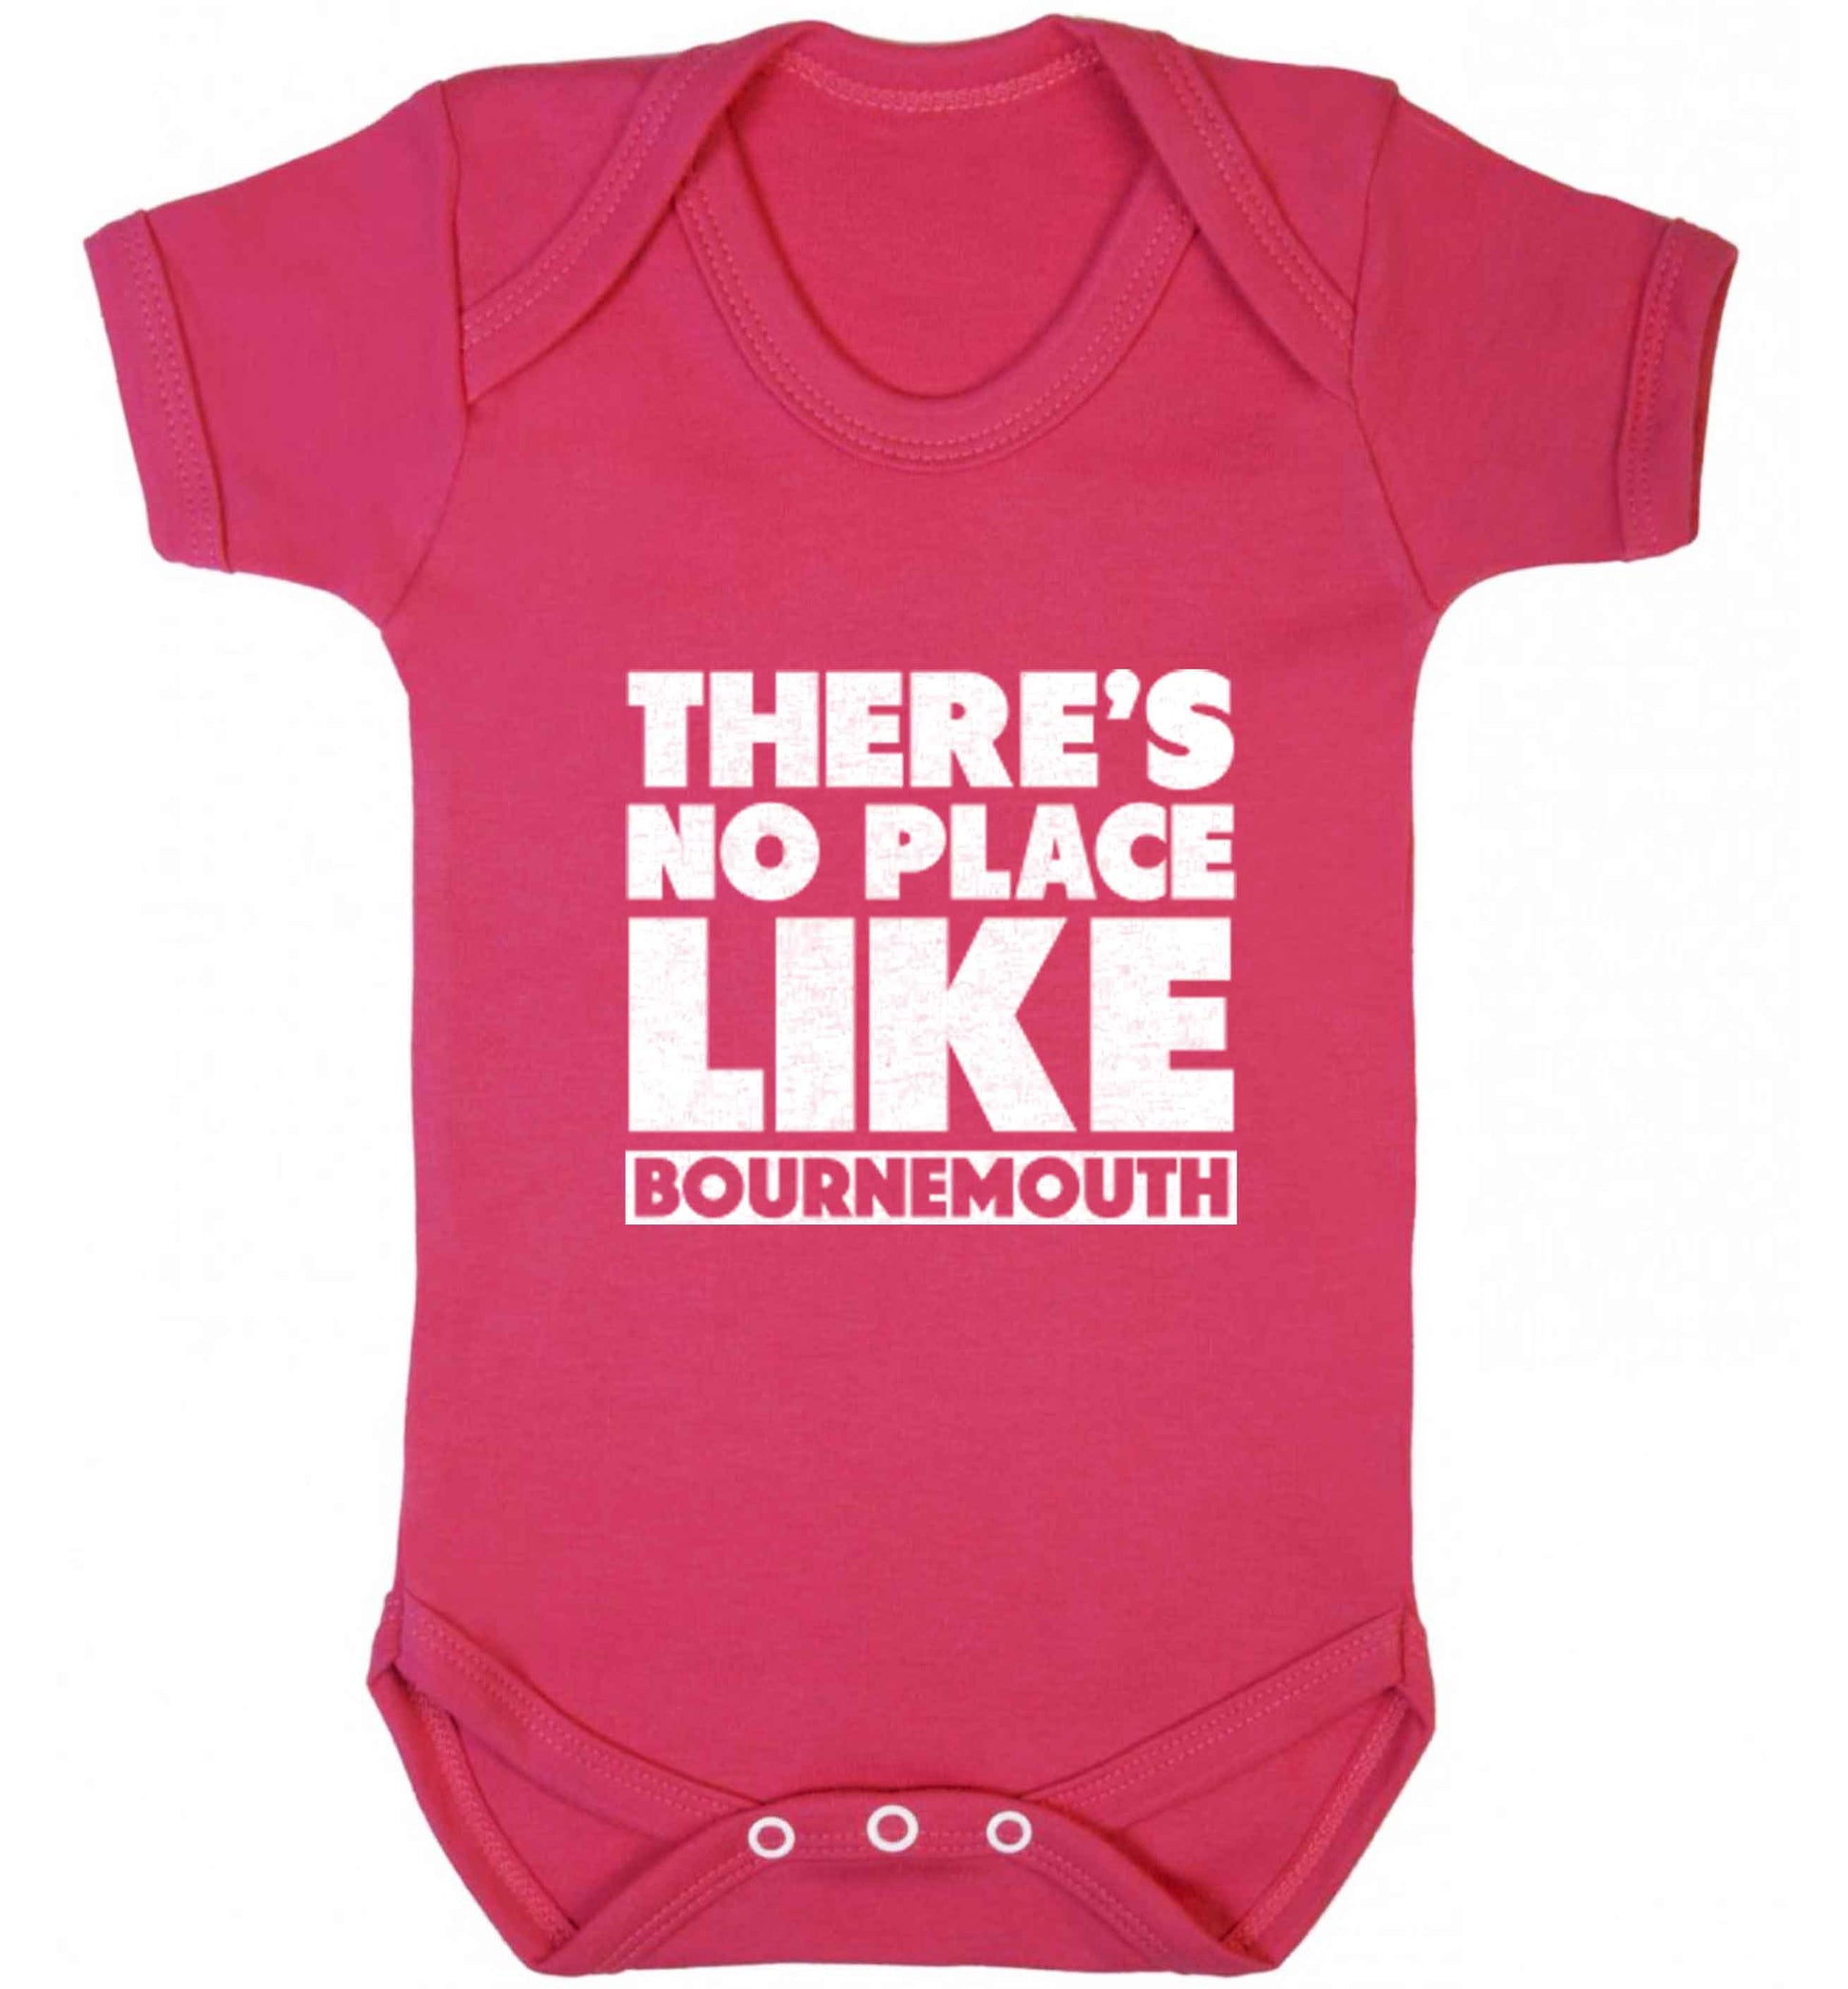 There's no place like Bournemouth baby vest dark pink 18-24 months